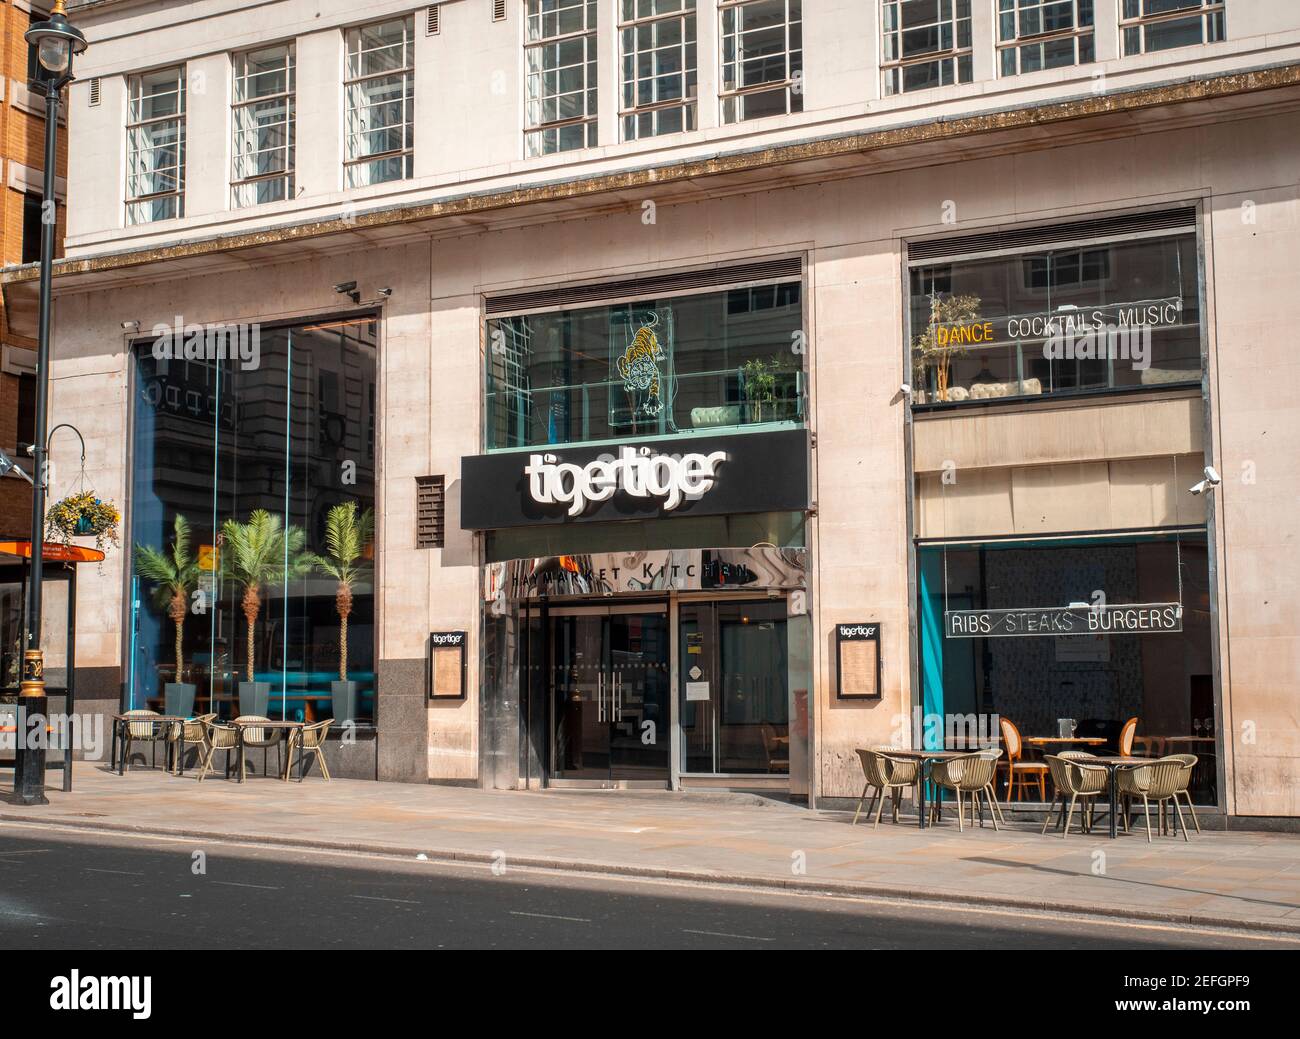 London, England - March 17, 2020: Tiger Tiger Restaurant on the Haymarket in London's West End is empty due to Coronavirus and Lockdown Stock Photo